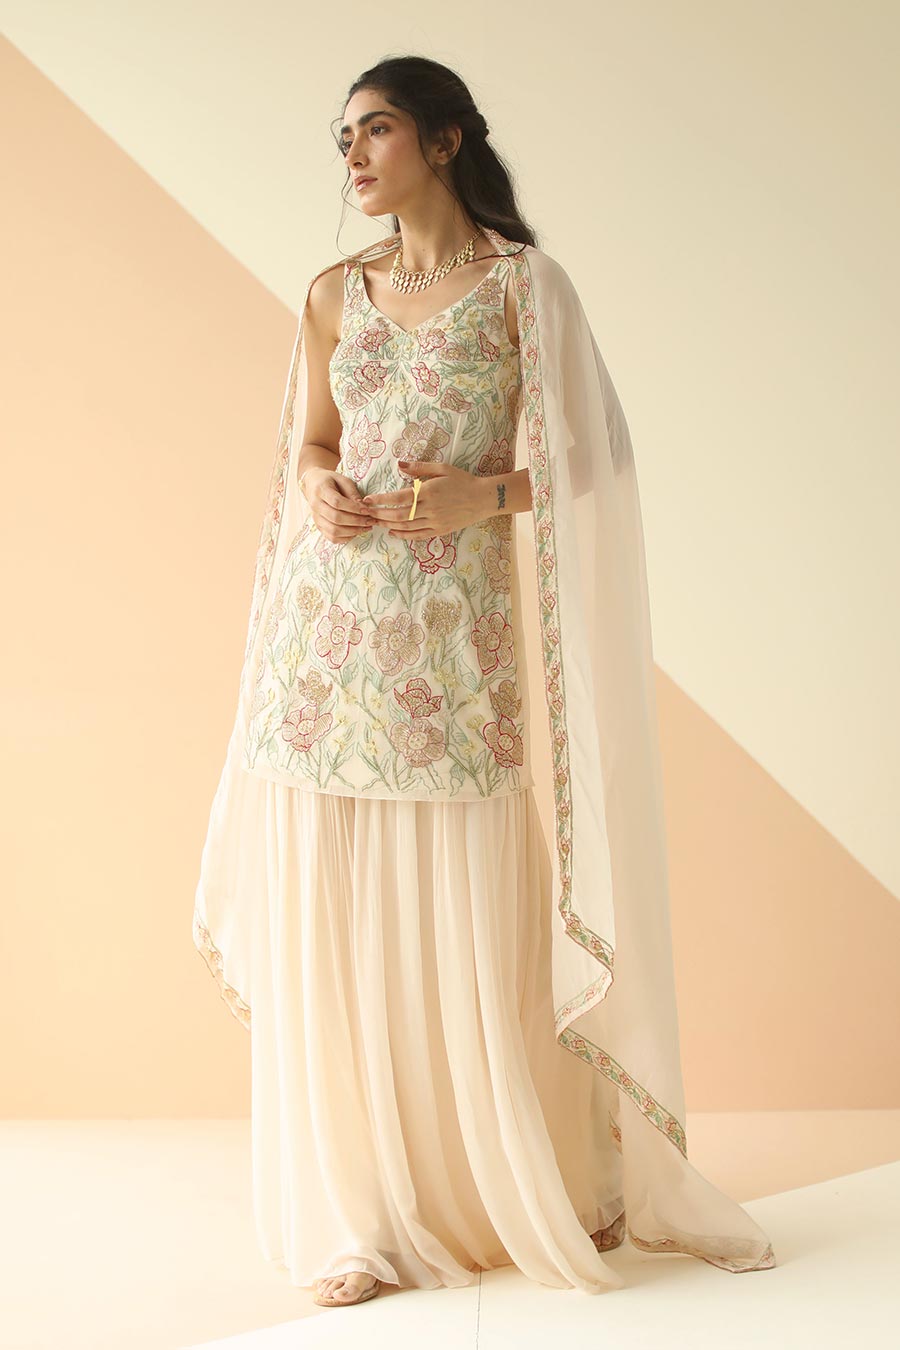 Off-White Embroidered Sharara Set With Dupatta